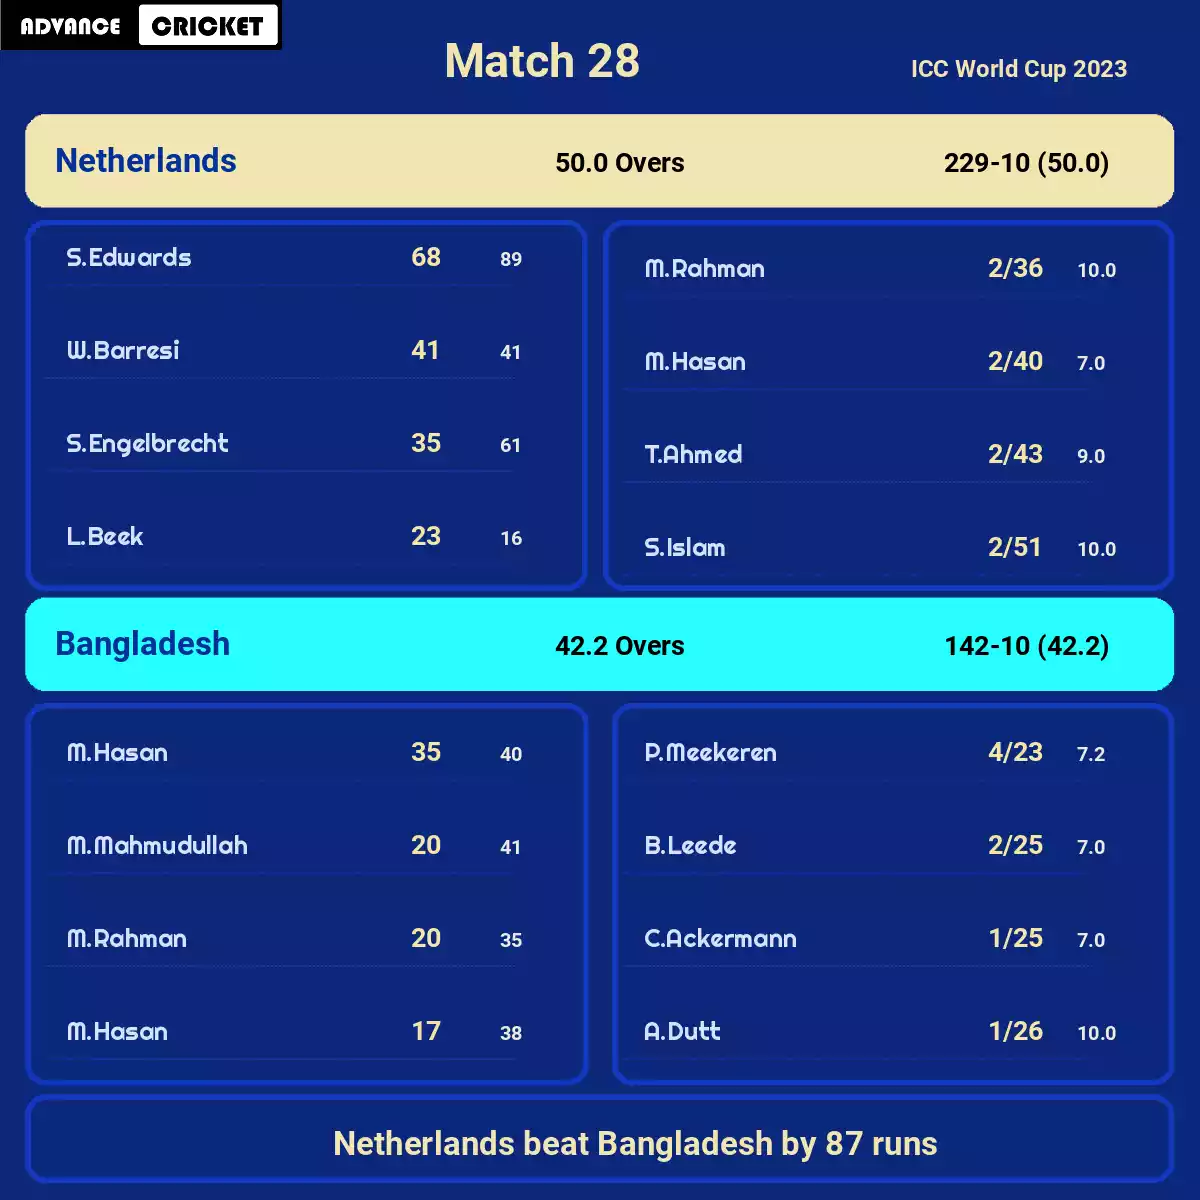 NED vs BAN Match 28 ICC World Cup 2023